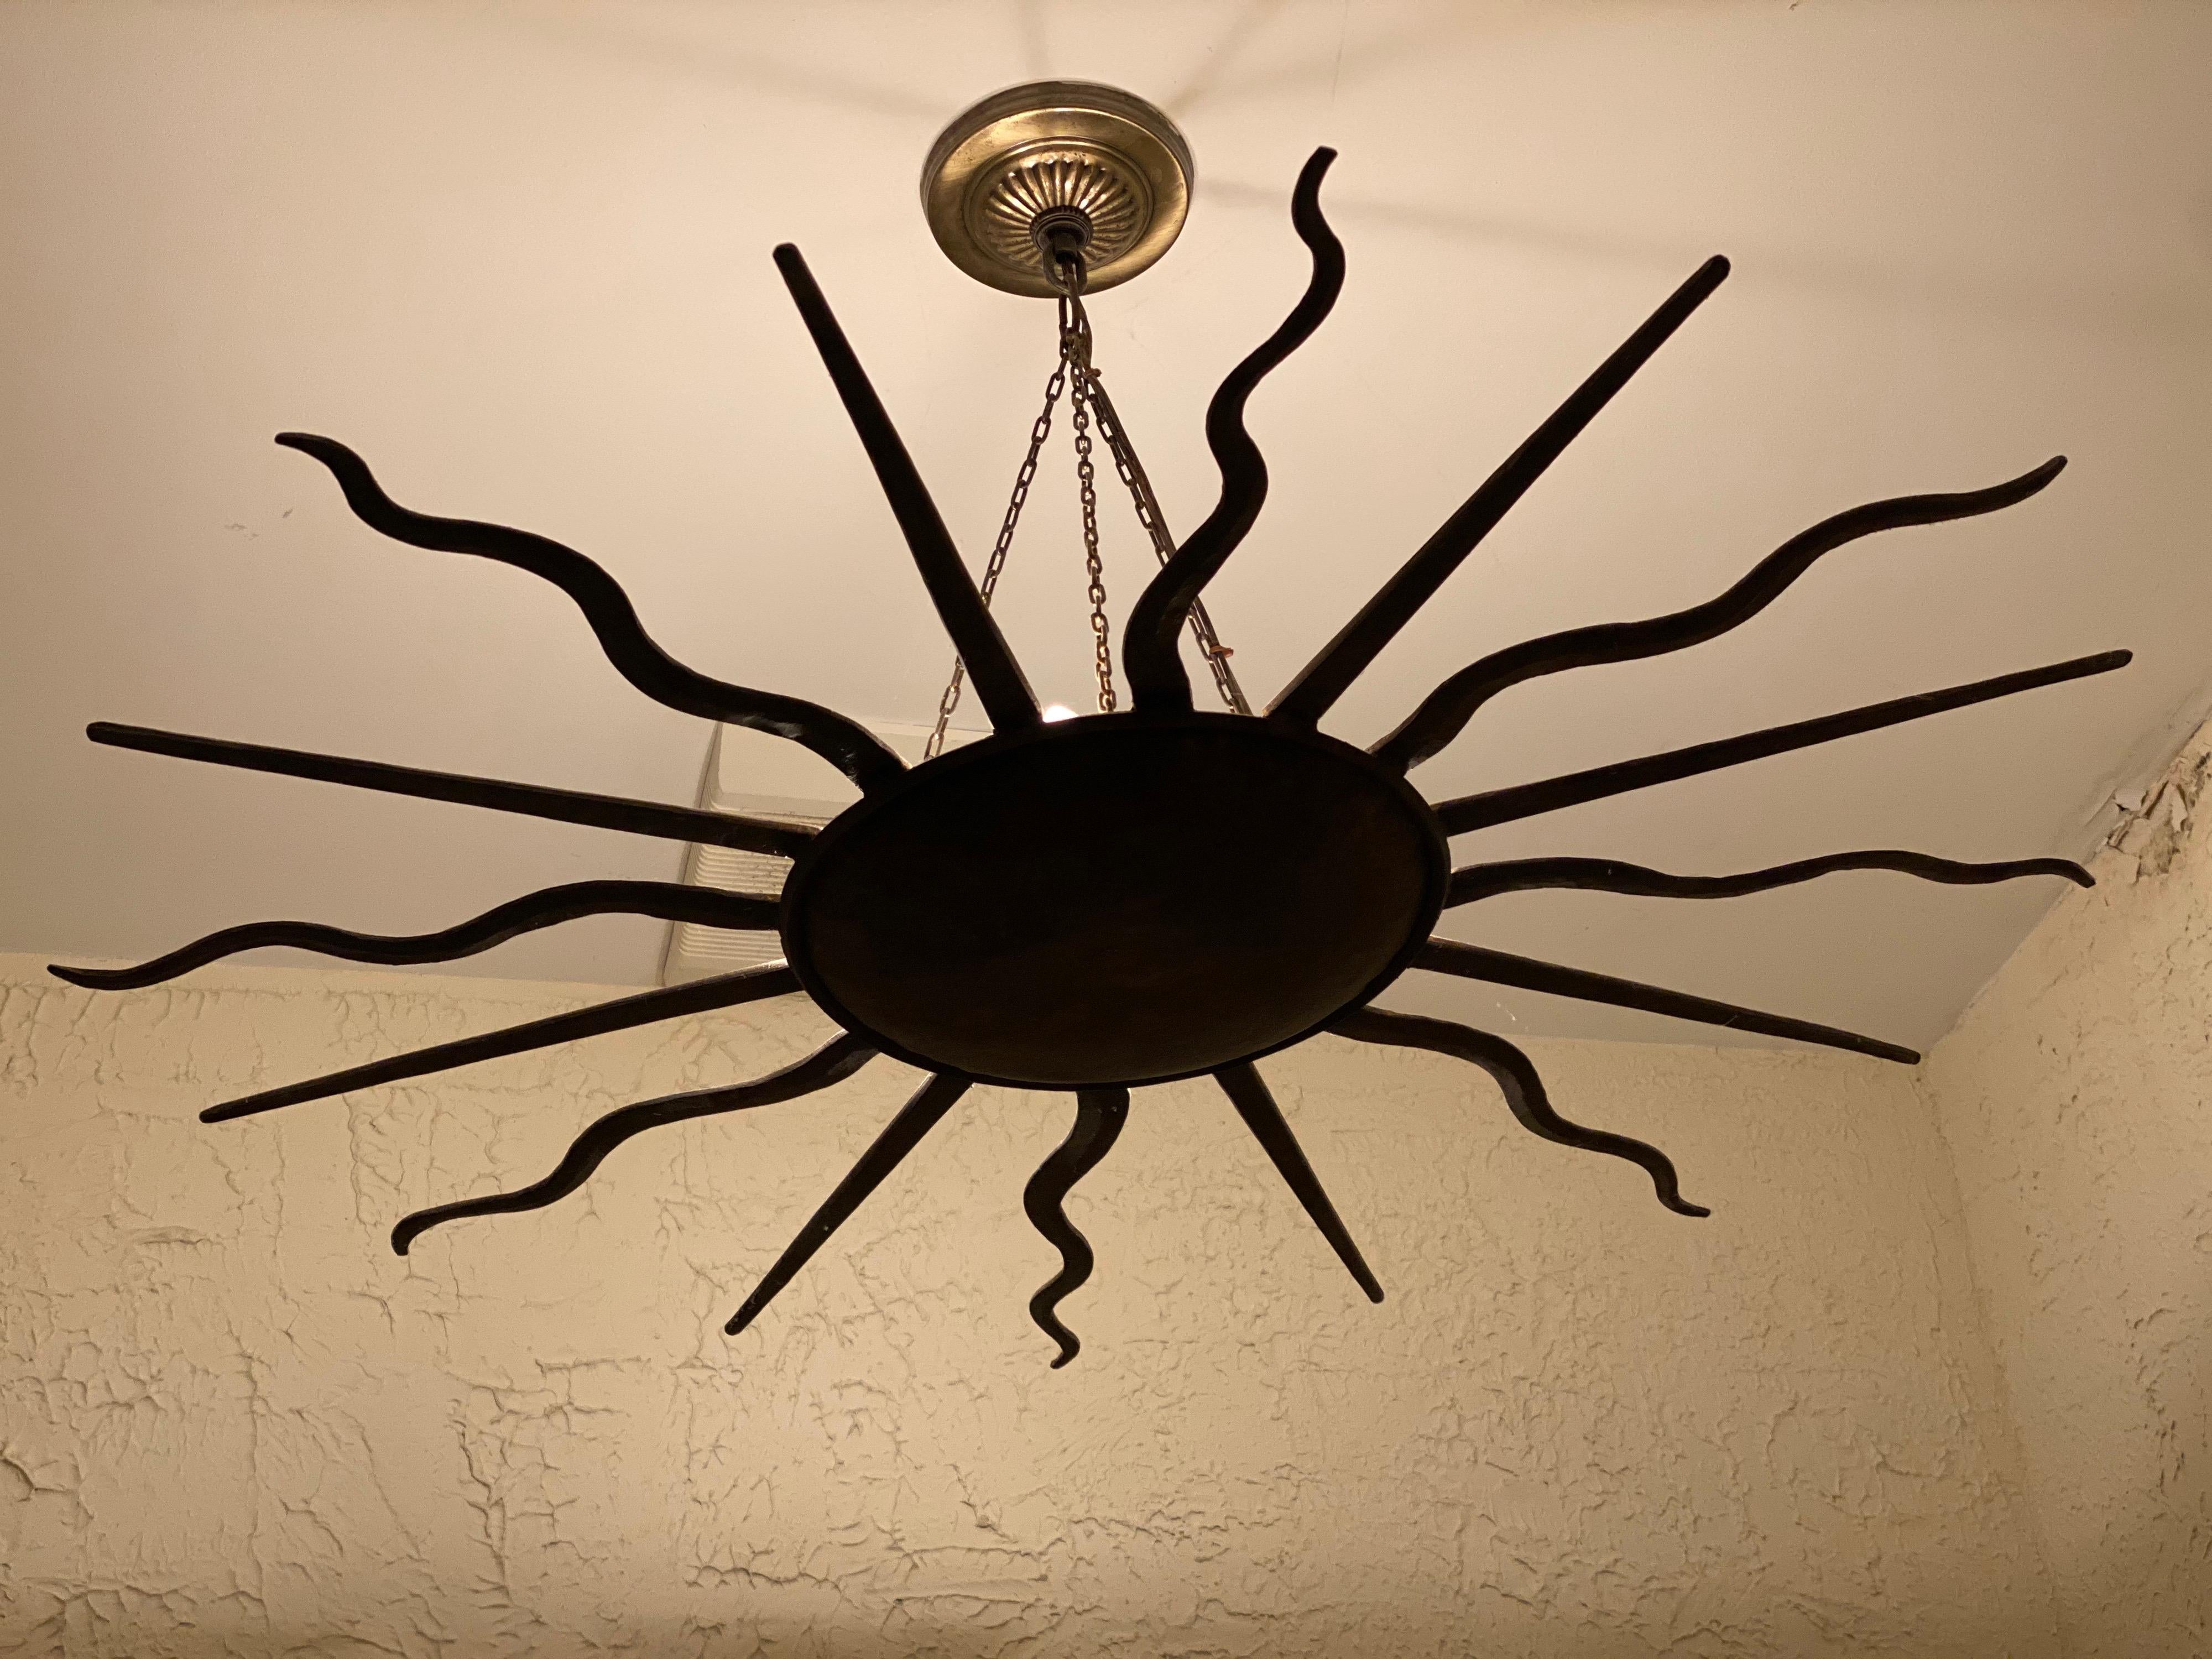 Iron Sunburst Chandelier in Antiqued Bronze Finish, Late 20th Century
When hanging, the chandelier very much reads as a black finish but upon closer inspection it is actually a antiqued bronze finish. A statement piece in a powder room. The four